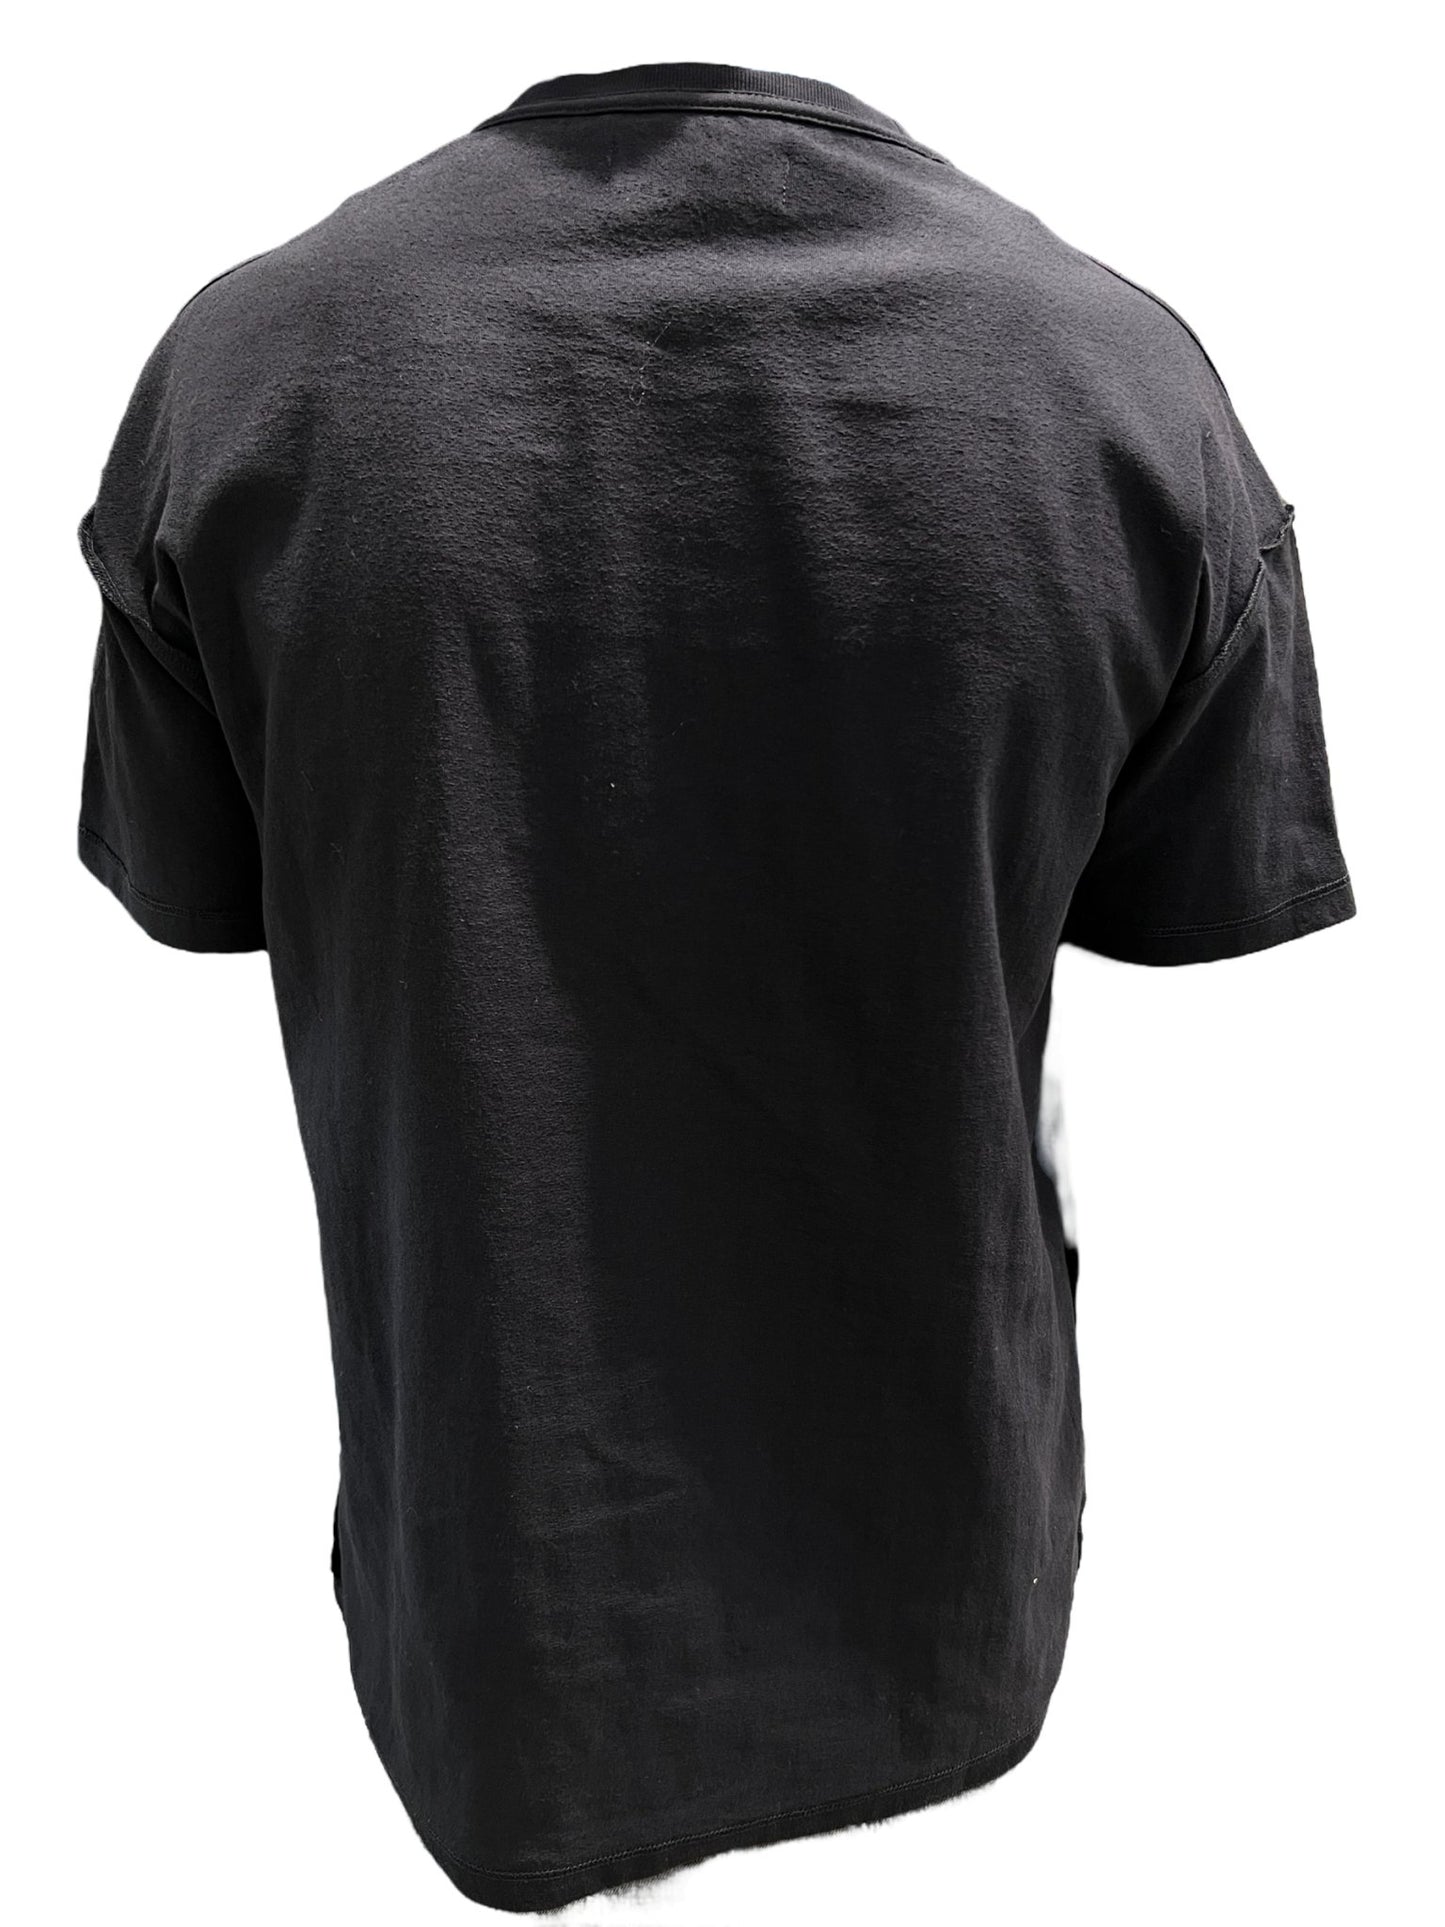 The back of a PURPLE BRAND P101-JHBB TEXTURED INSIDE OUT TEE BLACK on a white background.